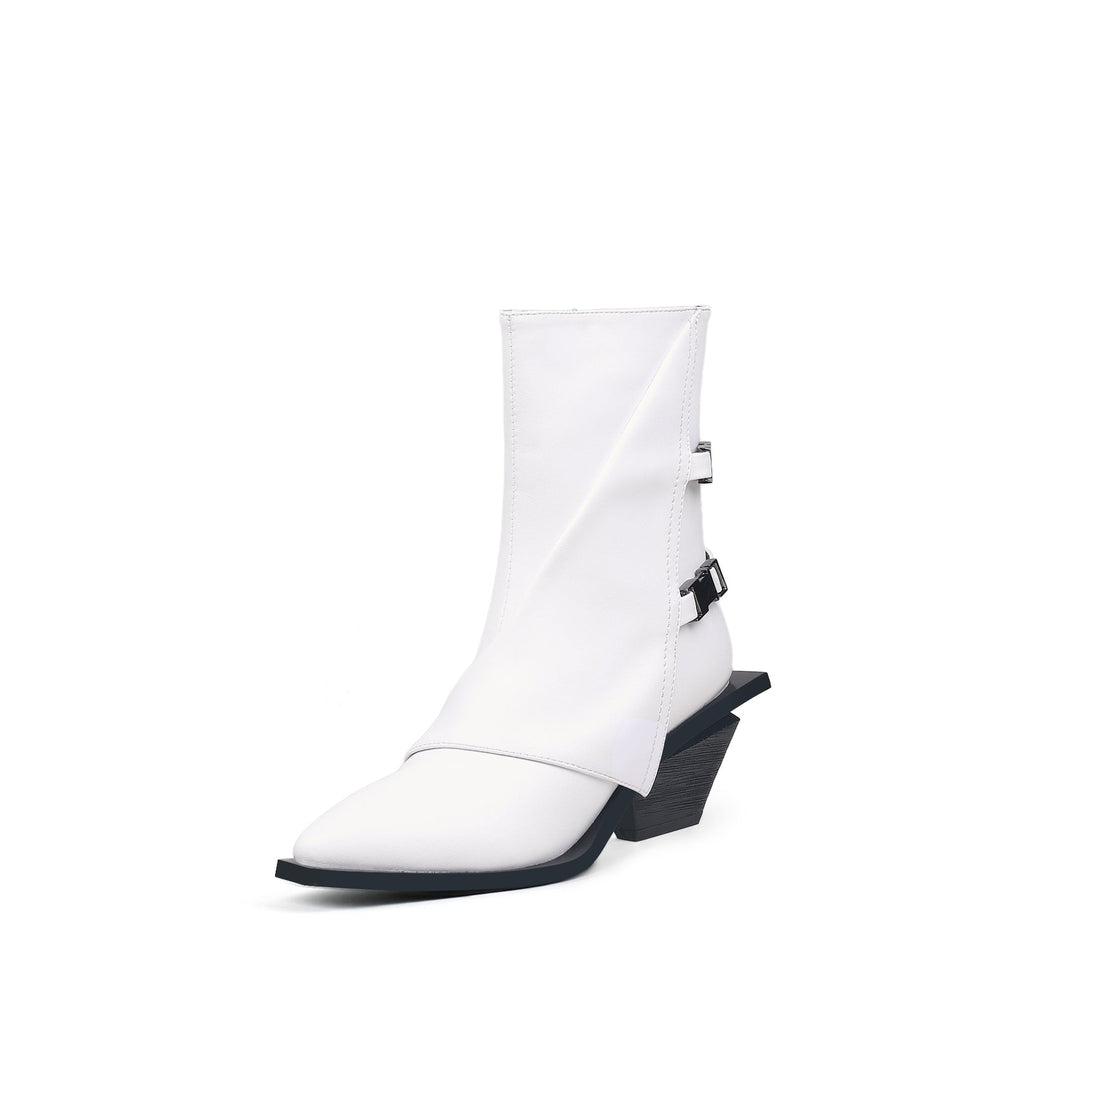 Next Page Belted White Boots - 0cm